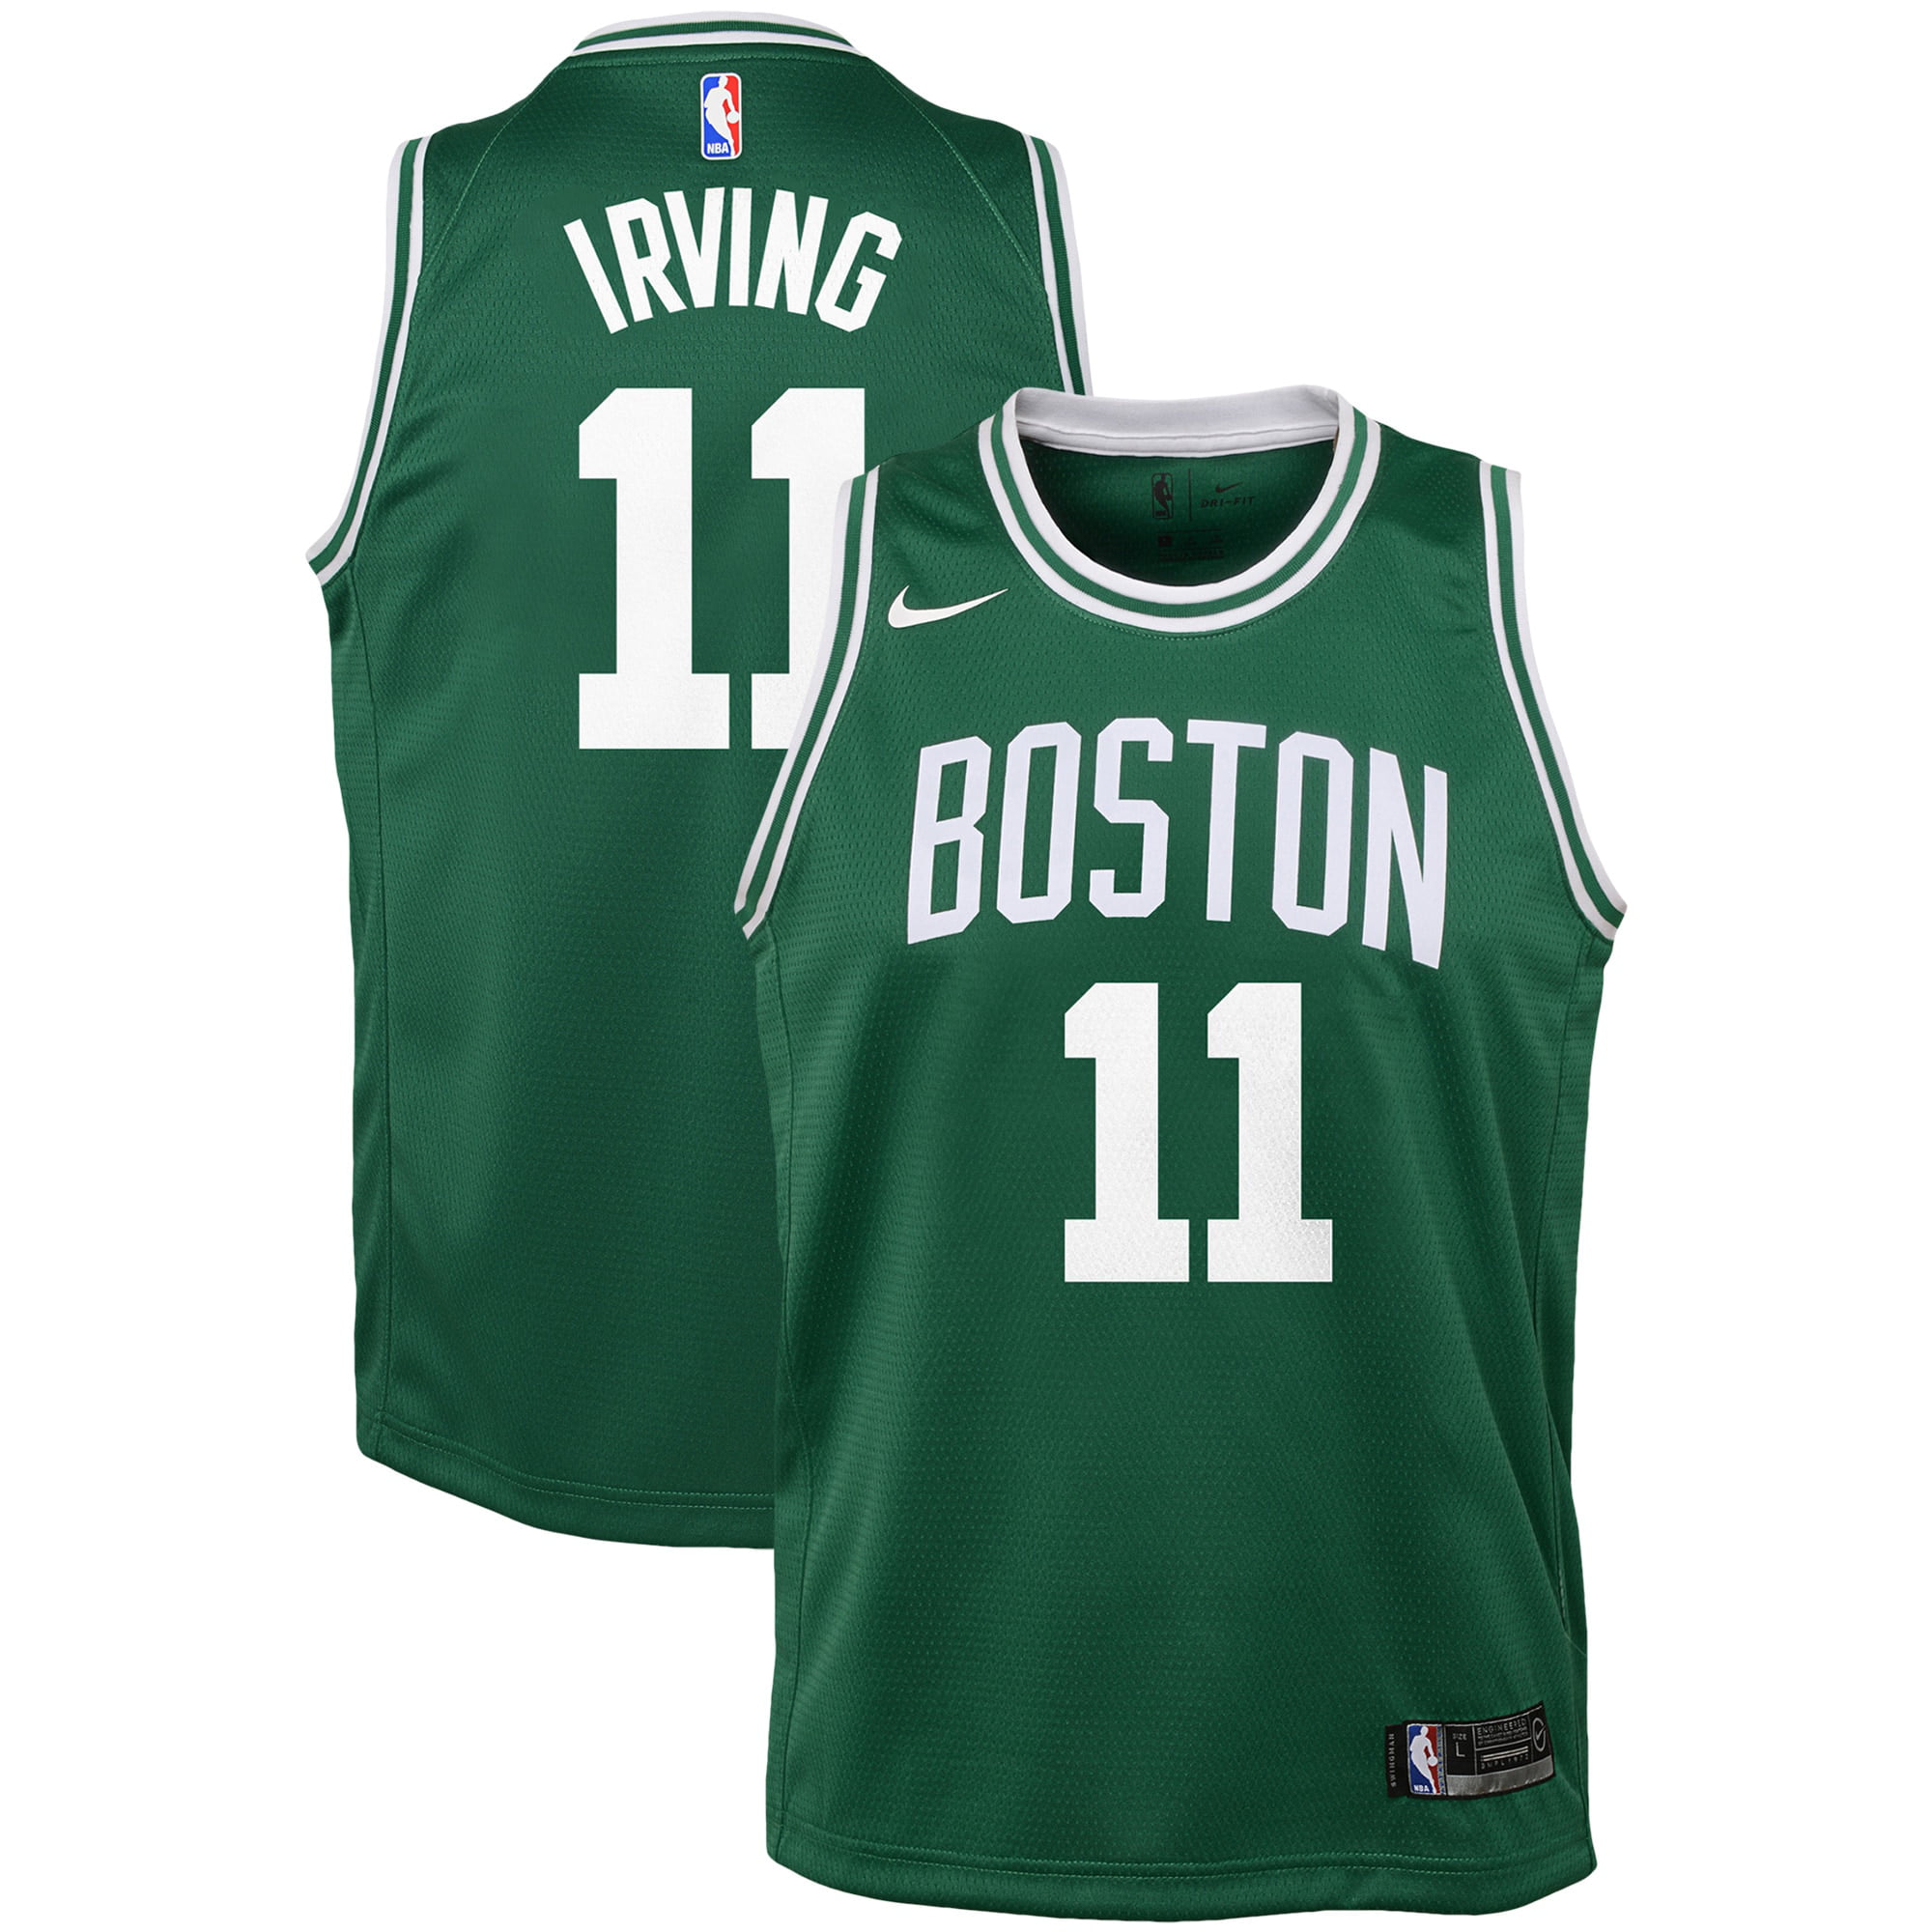 kyrie jersey youth